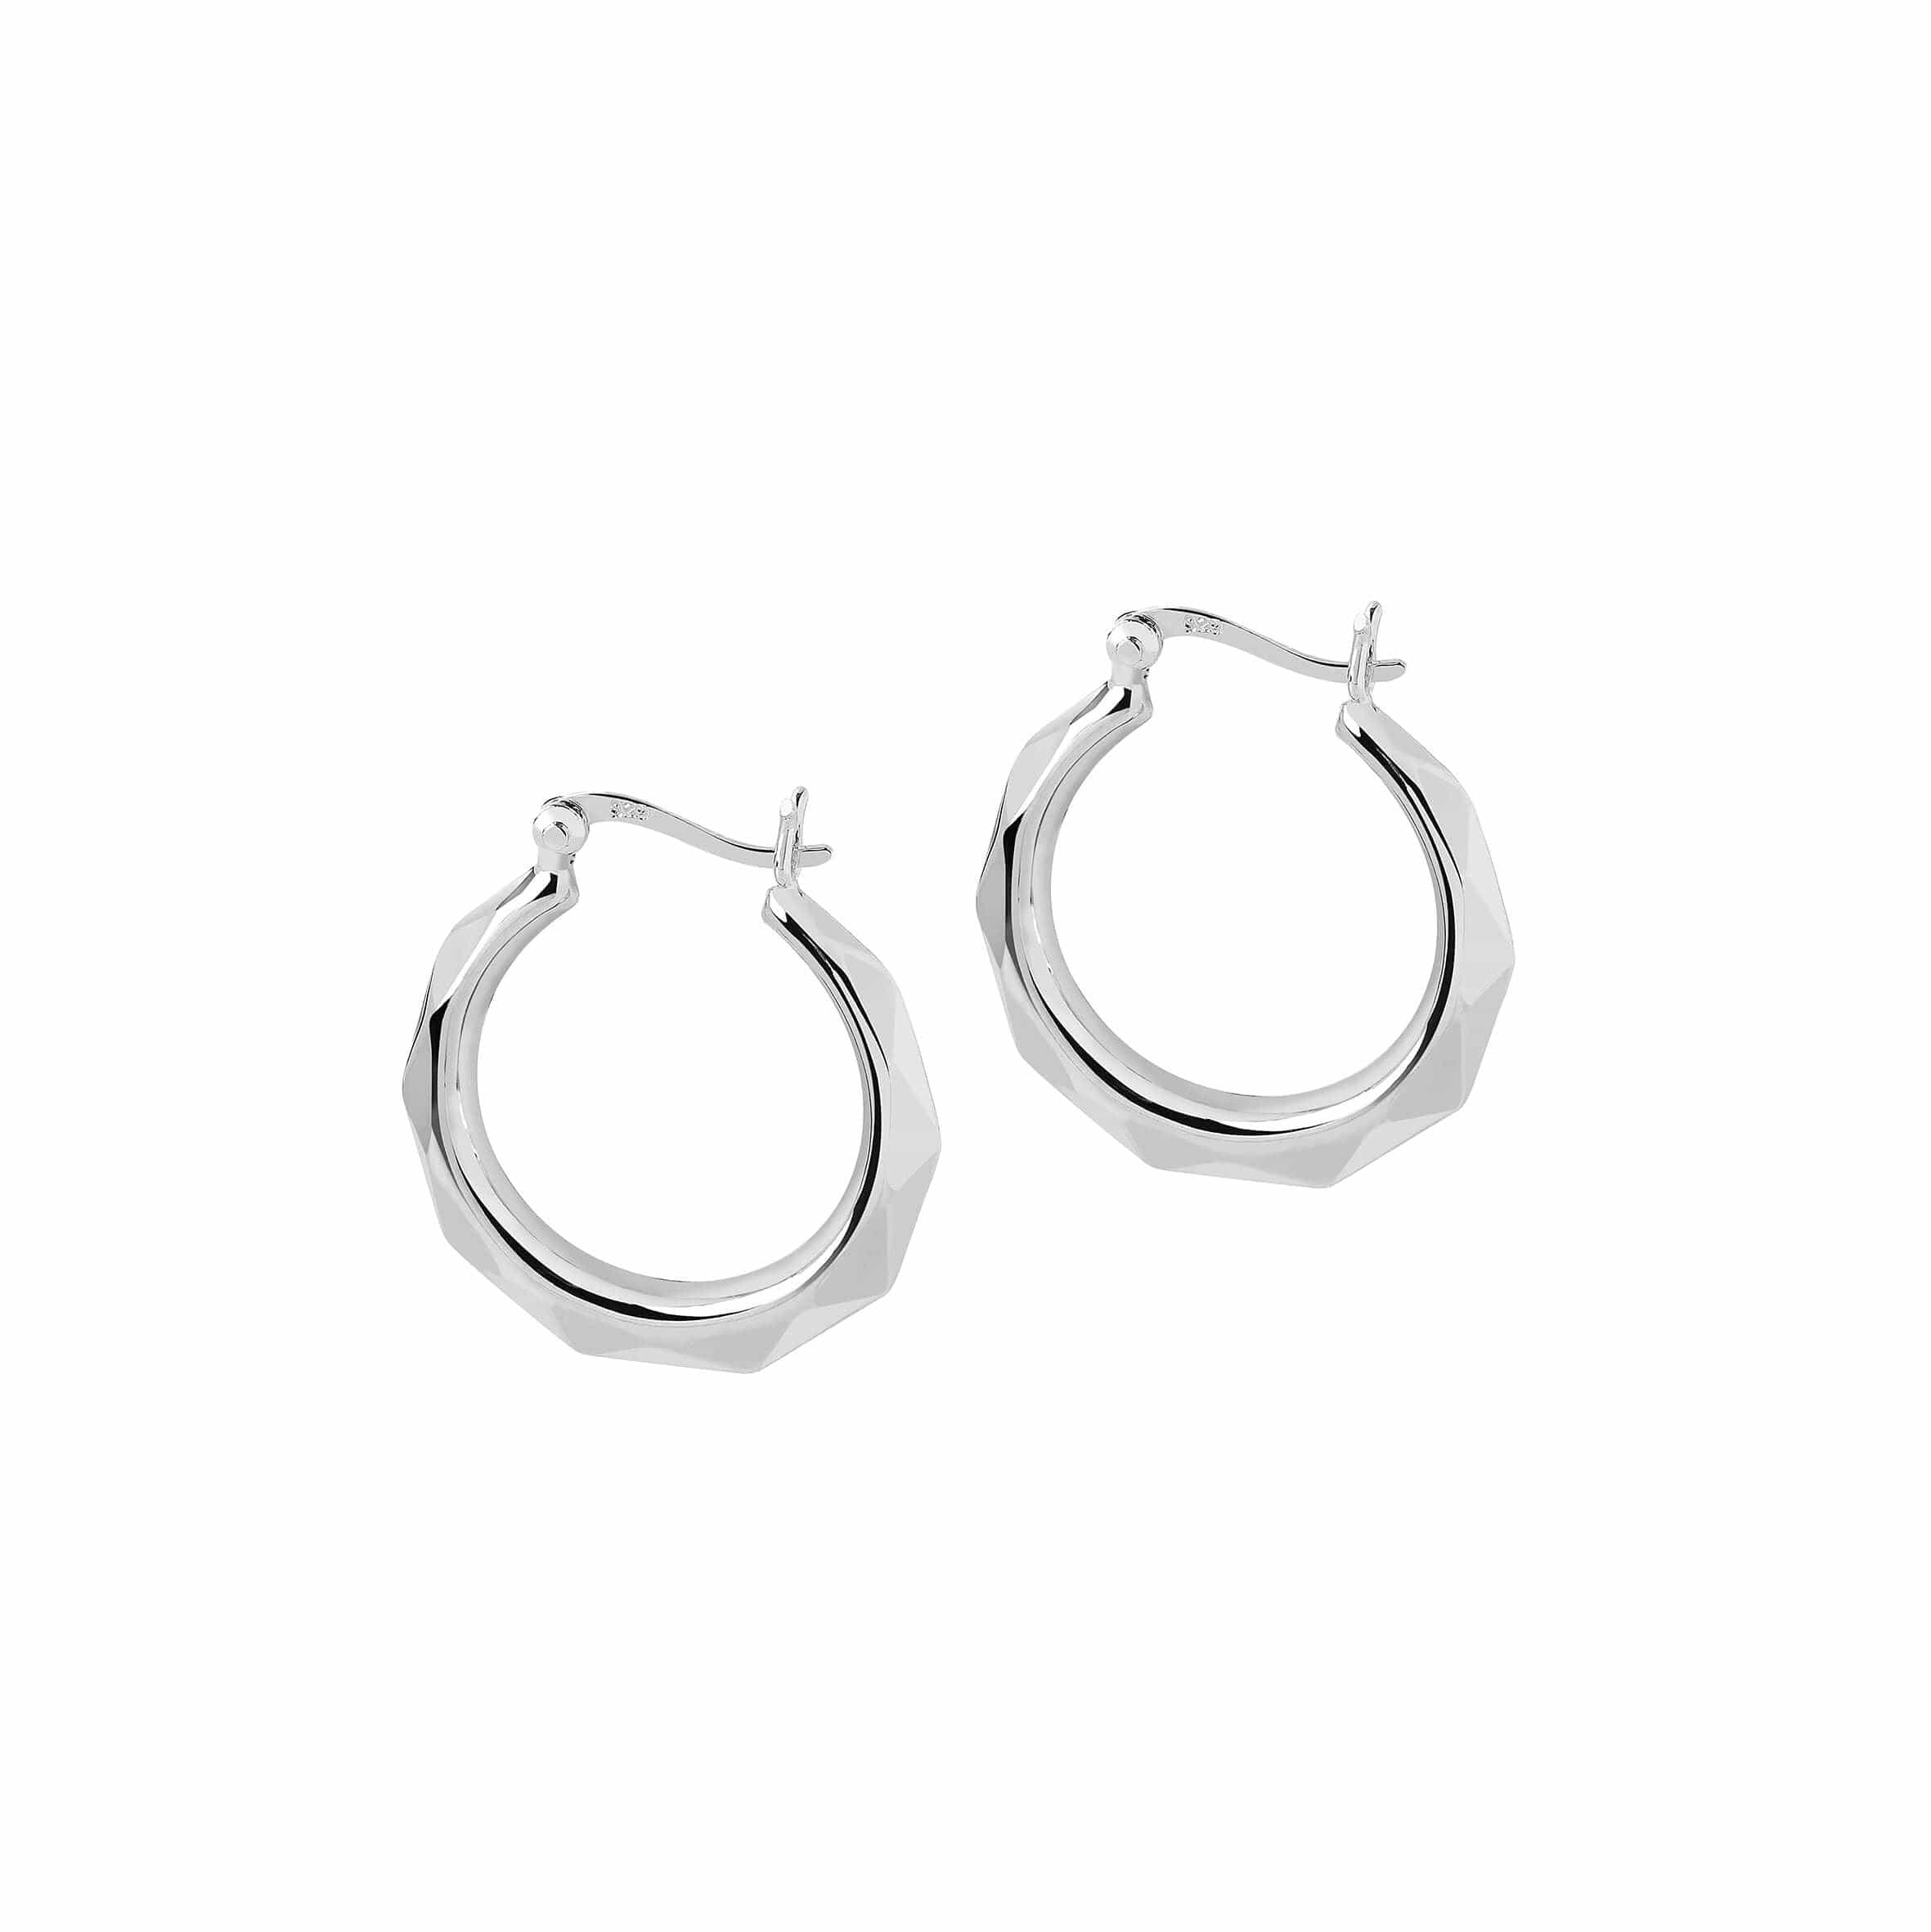 Small Size Mens White Gold Plated 925 Sterling Silver CZ Hoop Earrings |  eBay